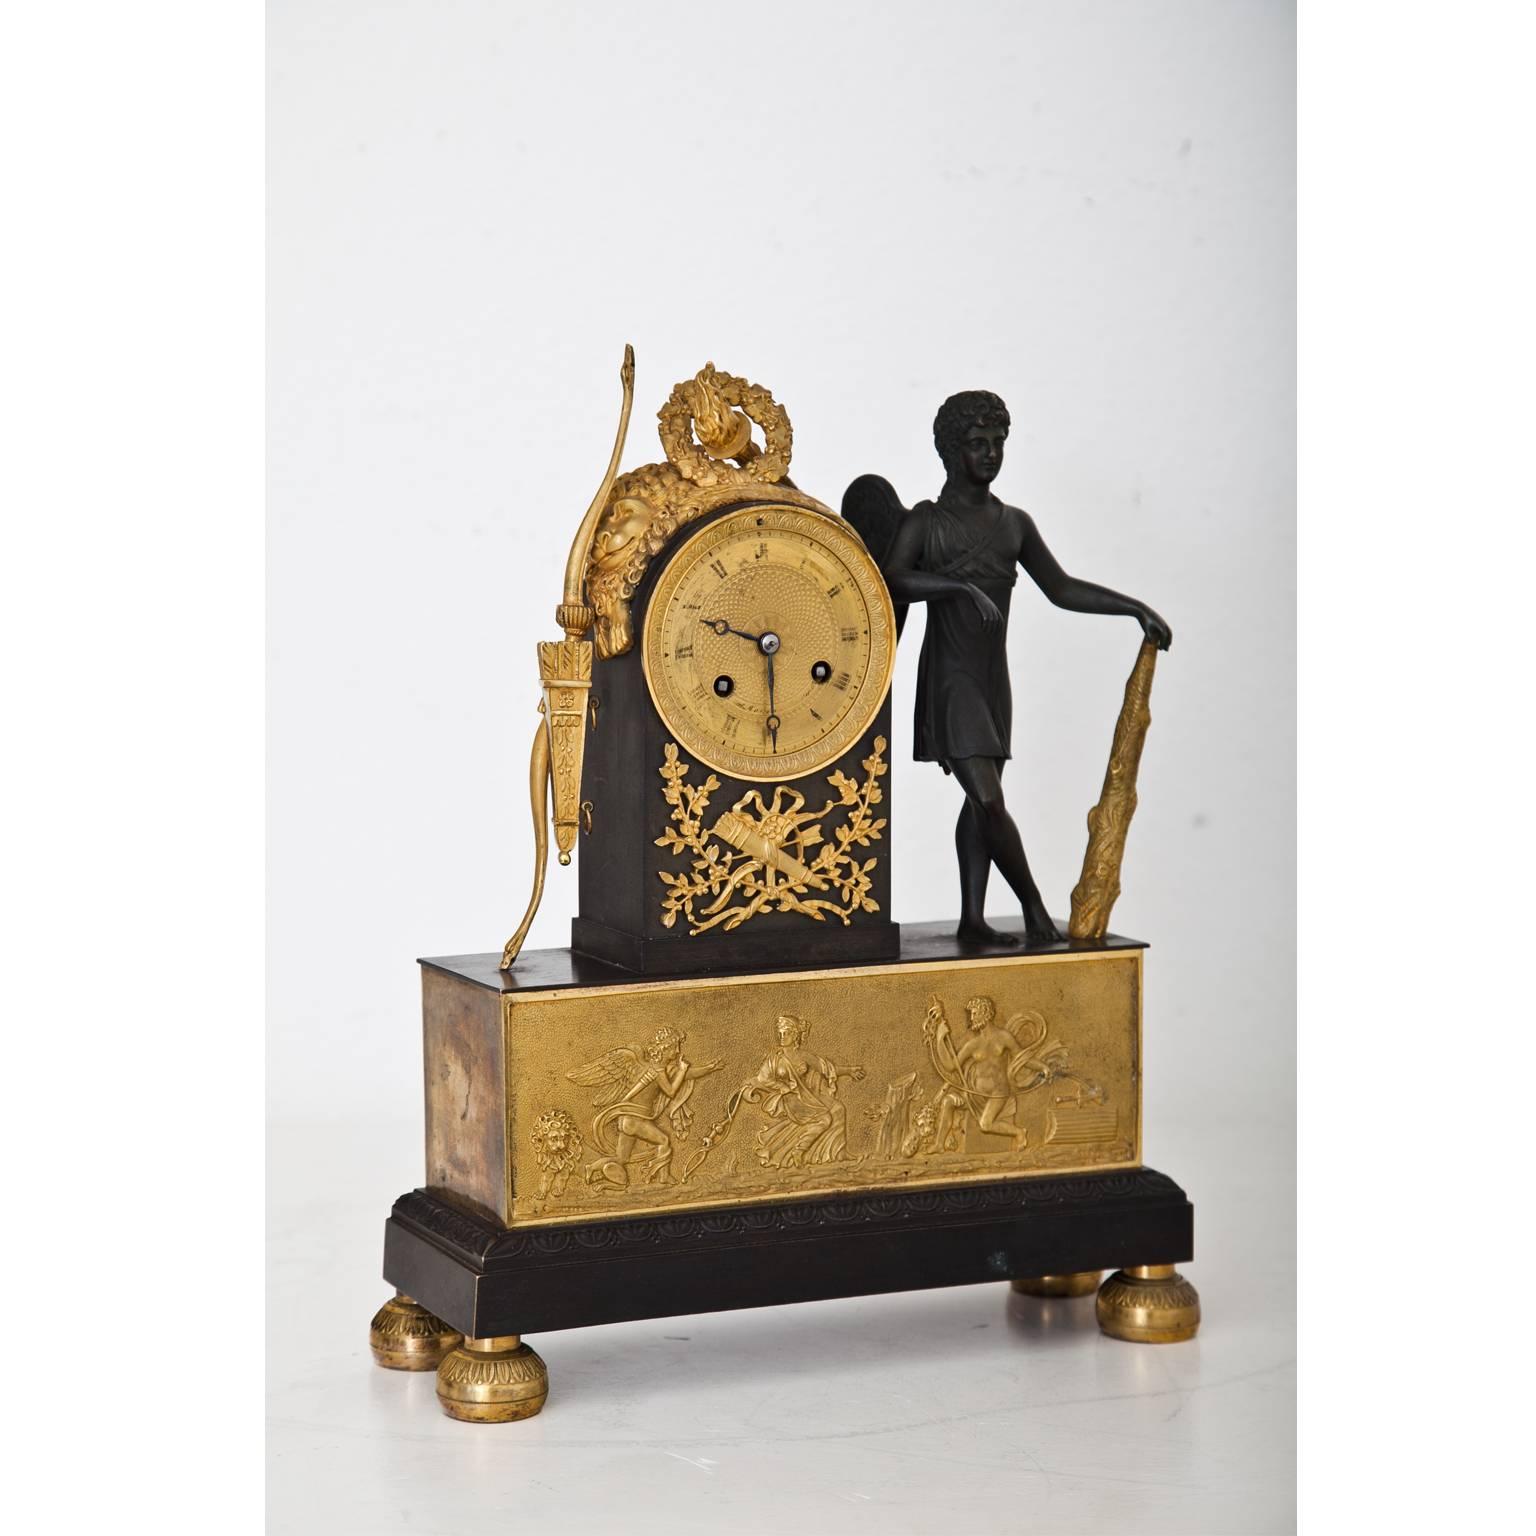 Pendule clock on low round feet with a rectangular base. The clockwork is in a rounded case, decorated with a torch, Hercules' lion skin and a laurel wreath. Next to it is the three-dimensional figure of cupid with Hercules' club and on the left